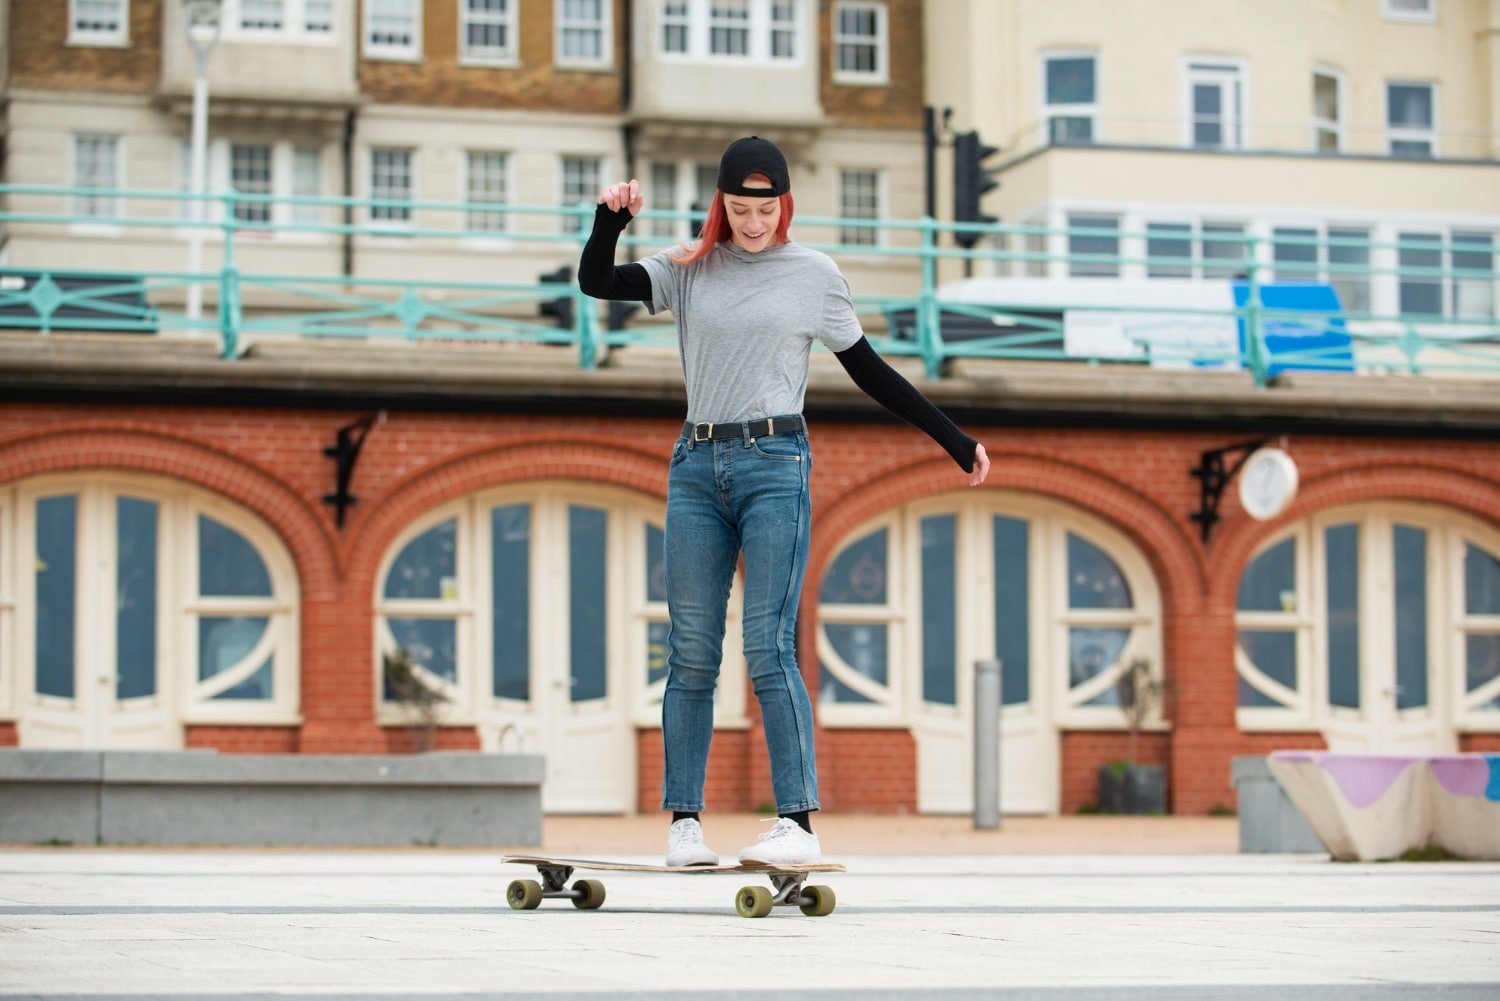 Ride The Streets In Style With Meepo Board’s High-Performance Electric Skateboards